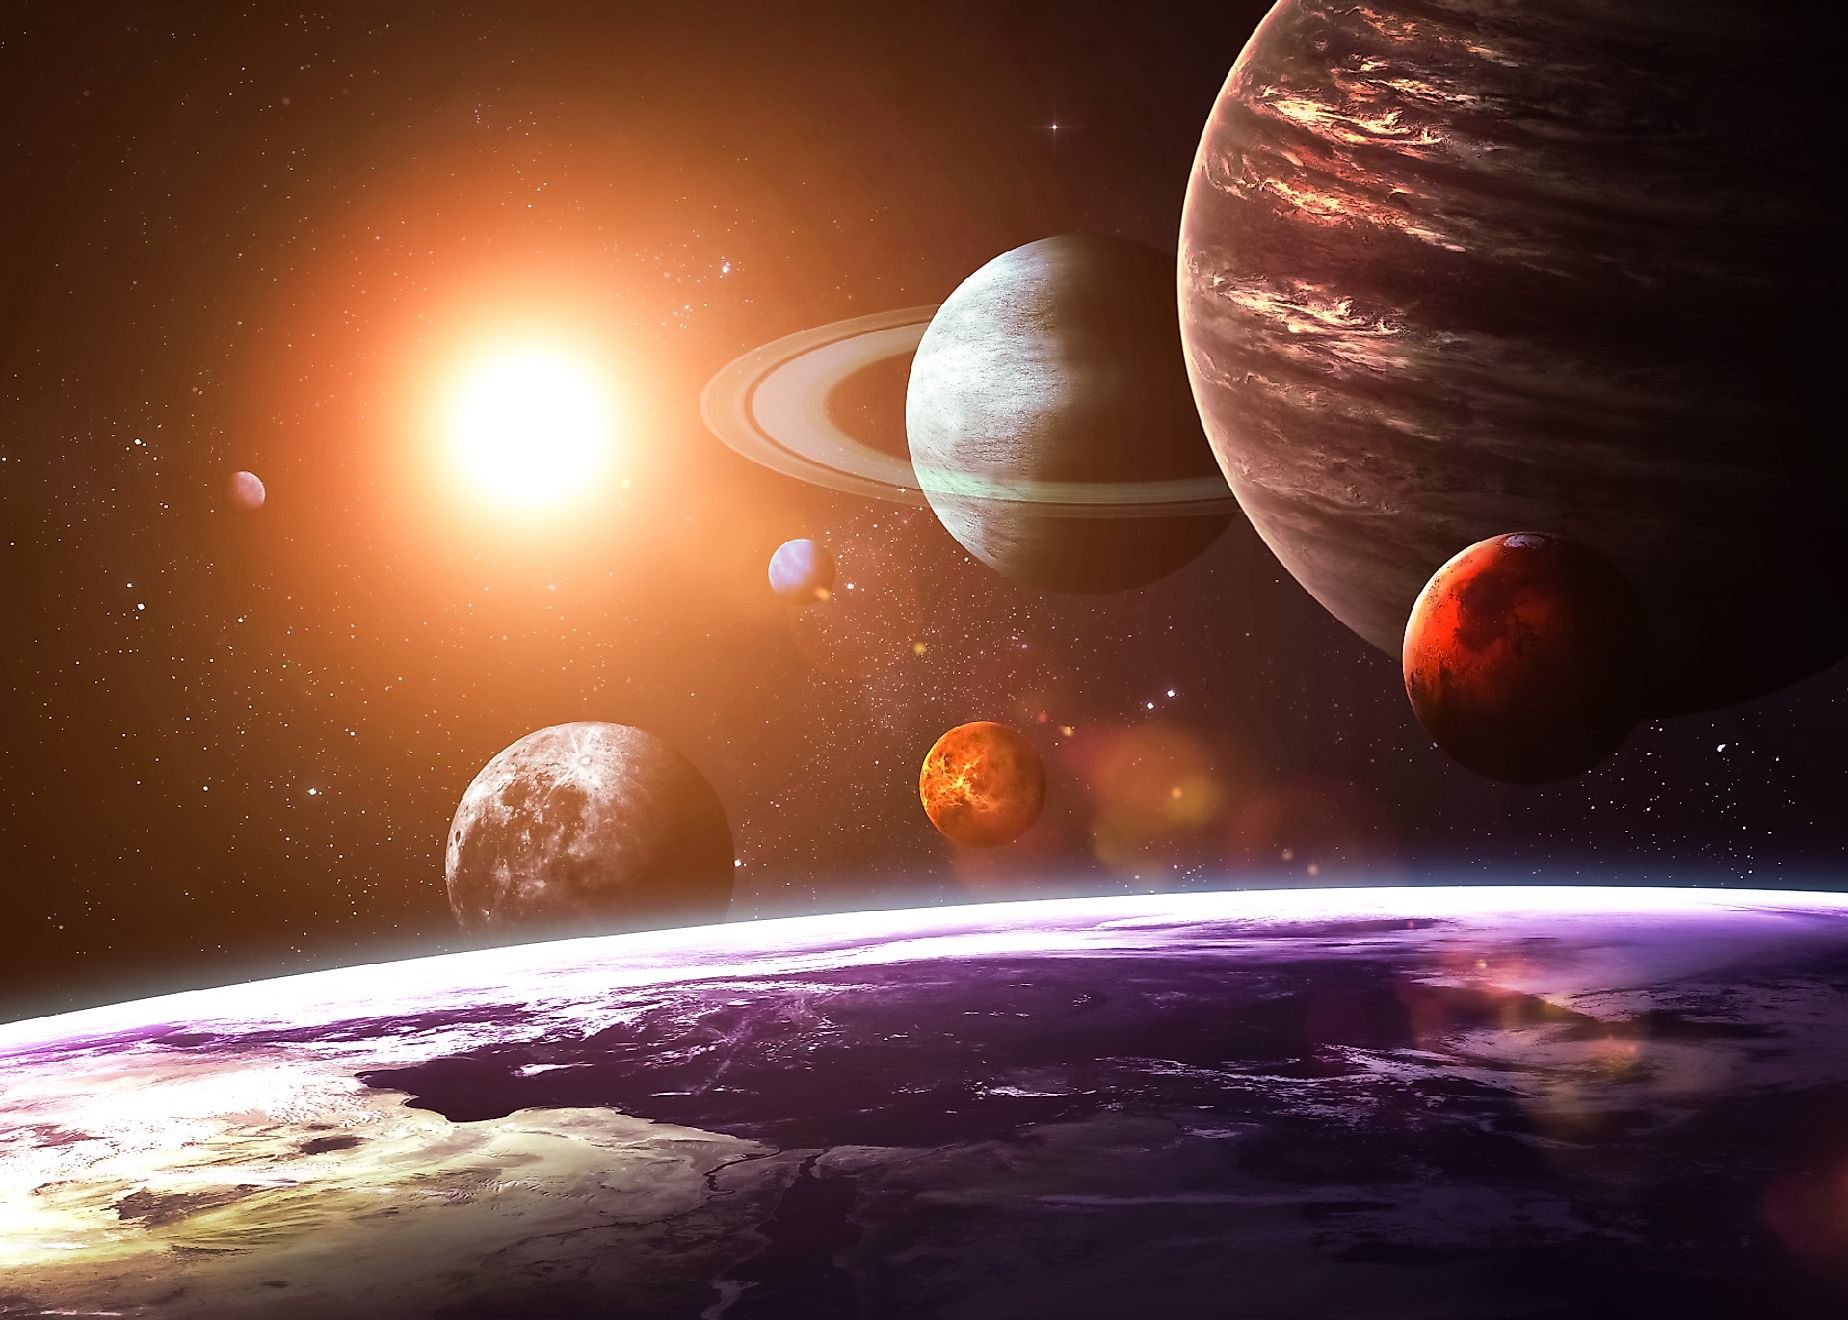 how many planets are in the solar system